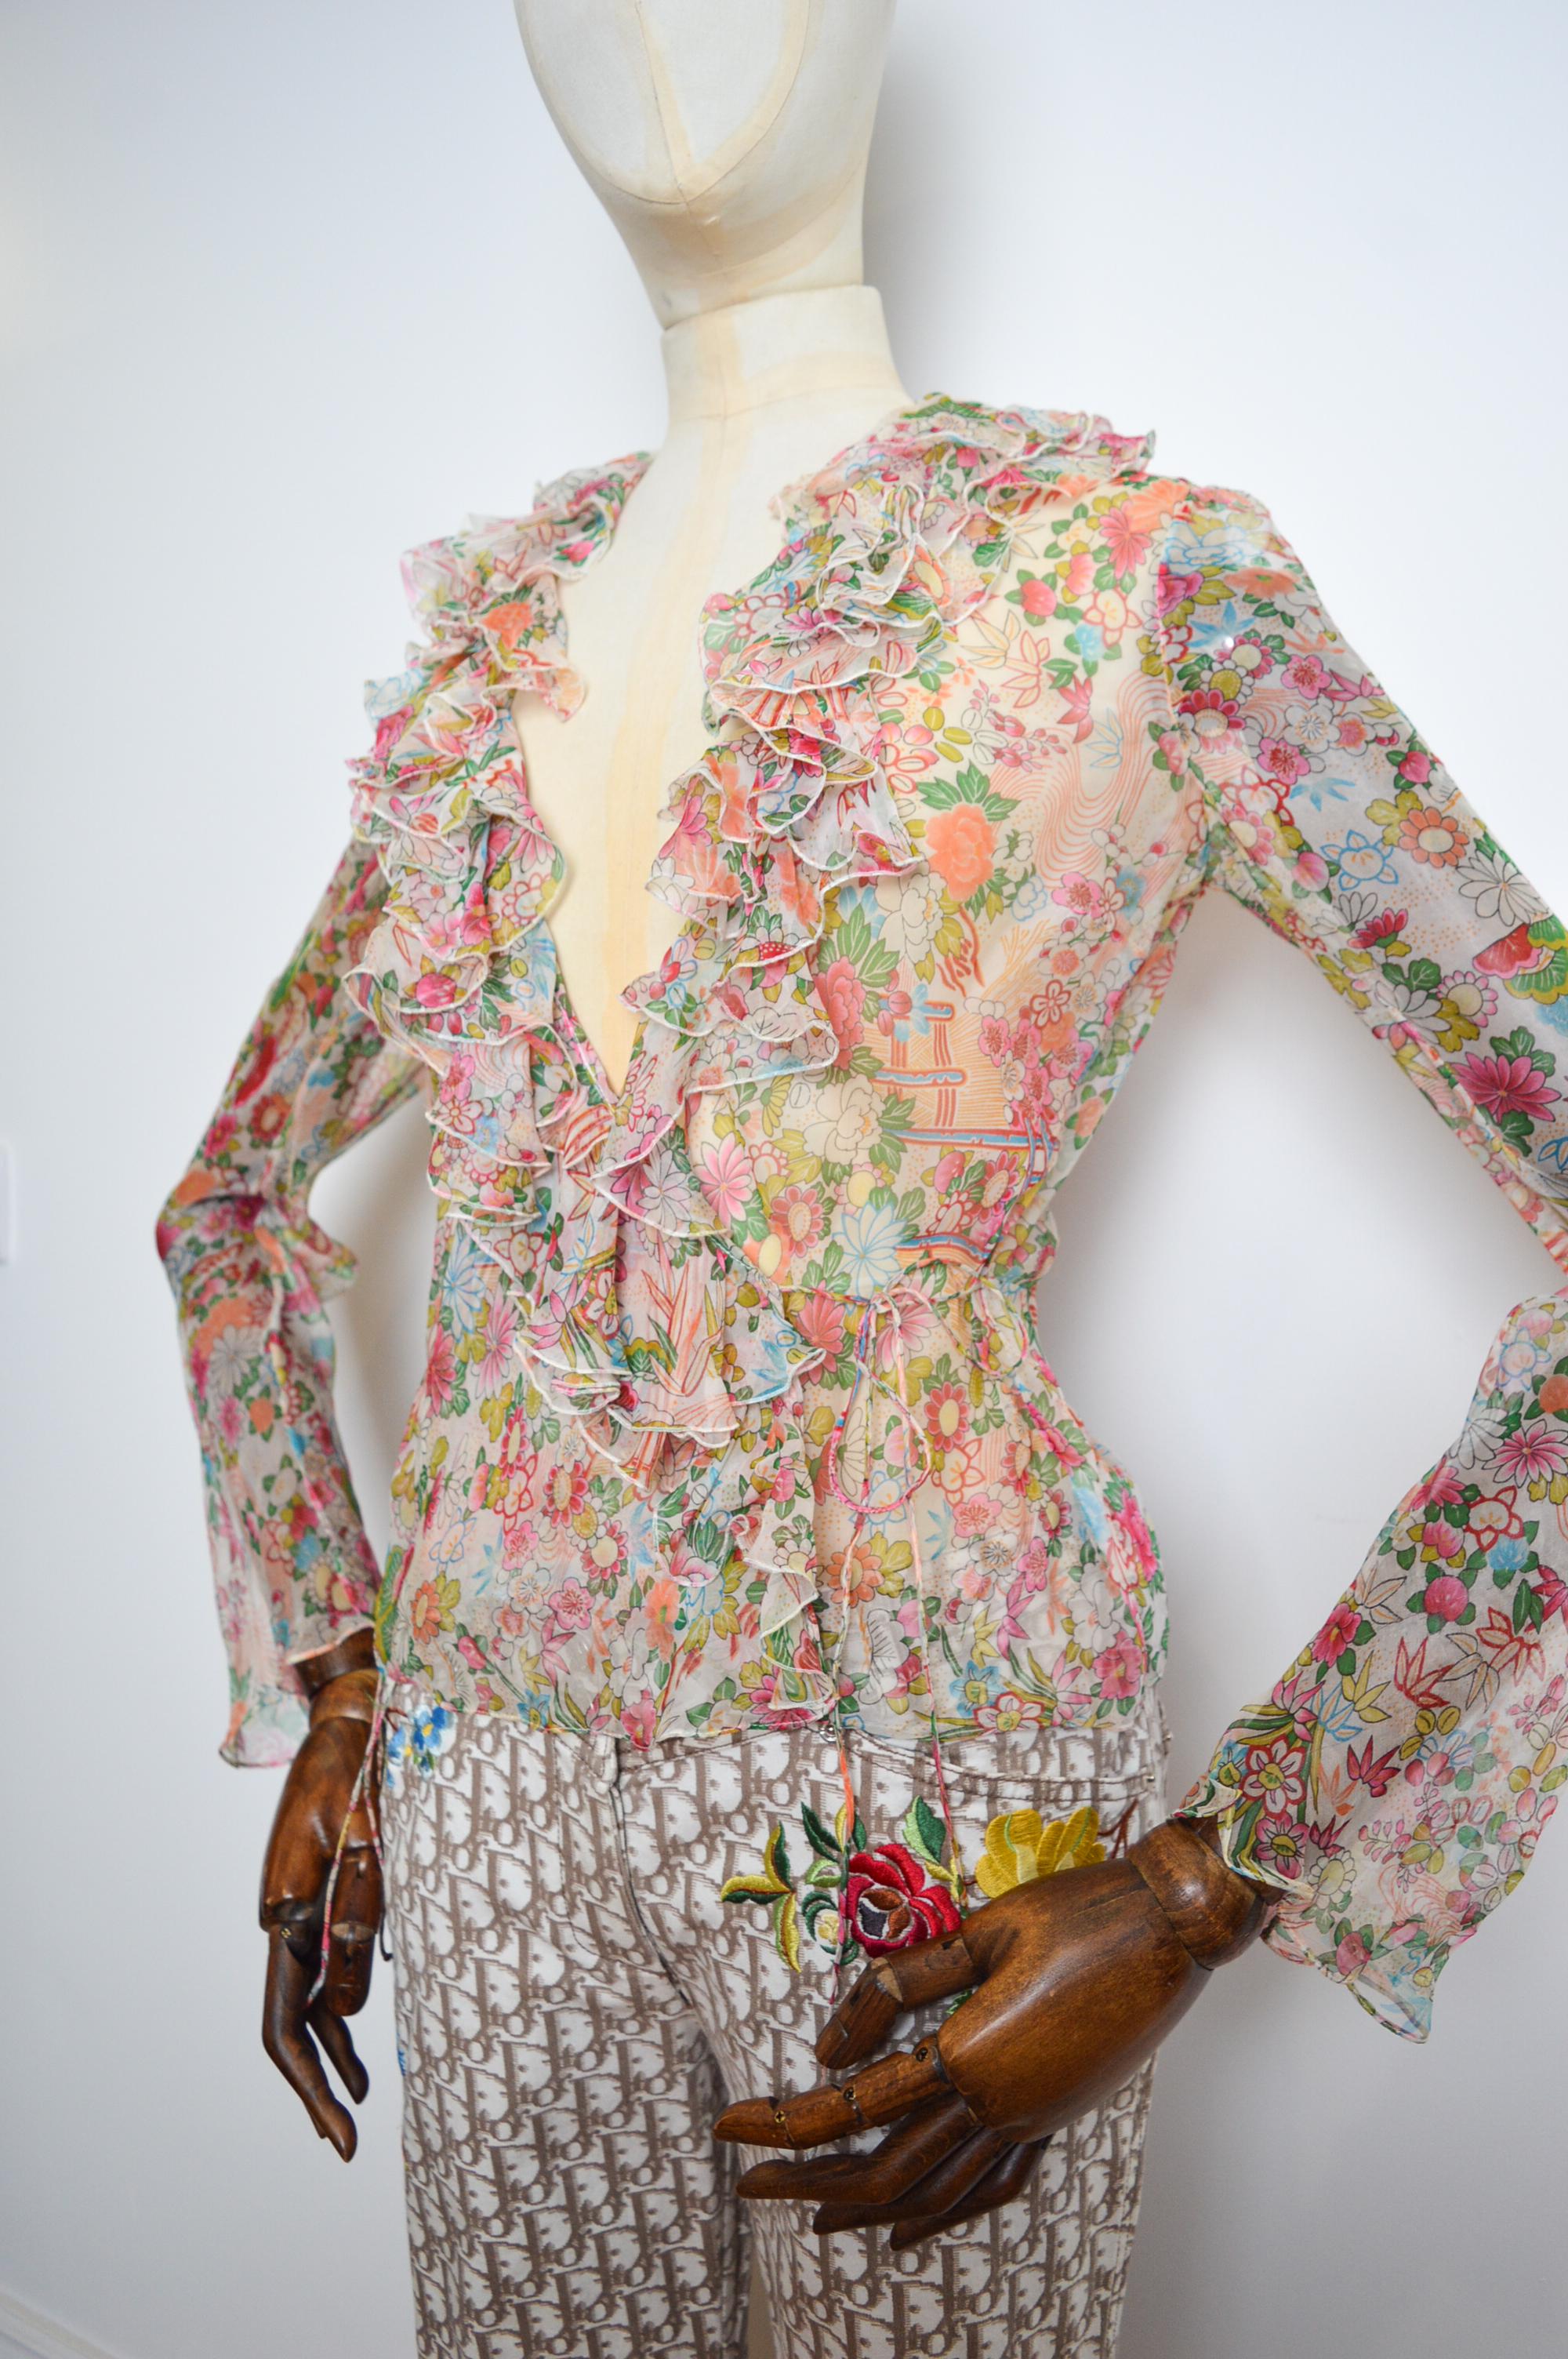 A Beautiful Delicate Spring / Summer 2002 ruffled, Chiffon blouse by John Galliano for Christian Dior. 

Intricately adorned with a cherry blossom print. 

100% Silk

MADE IN FRANCE.

Measurements in Inches - 
Pit to Pit -17